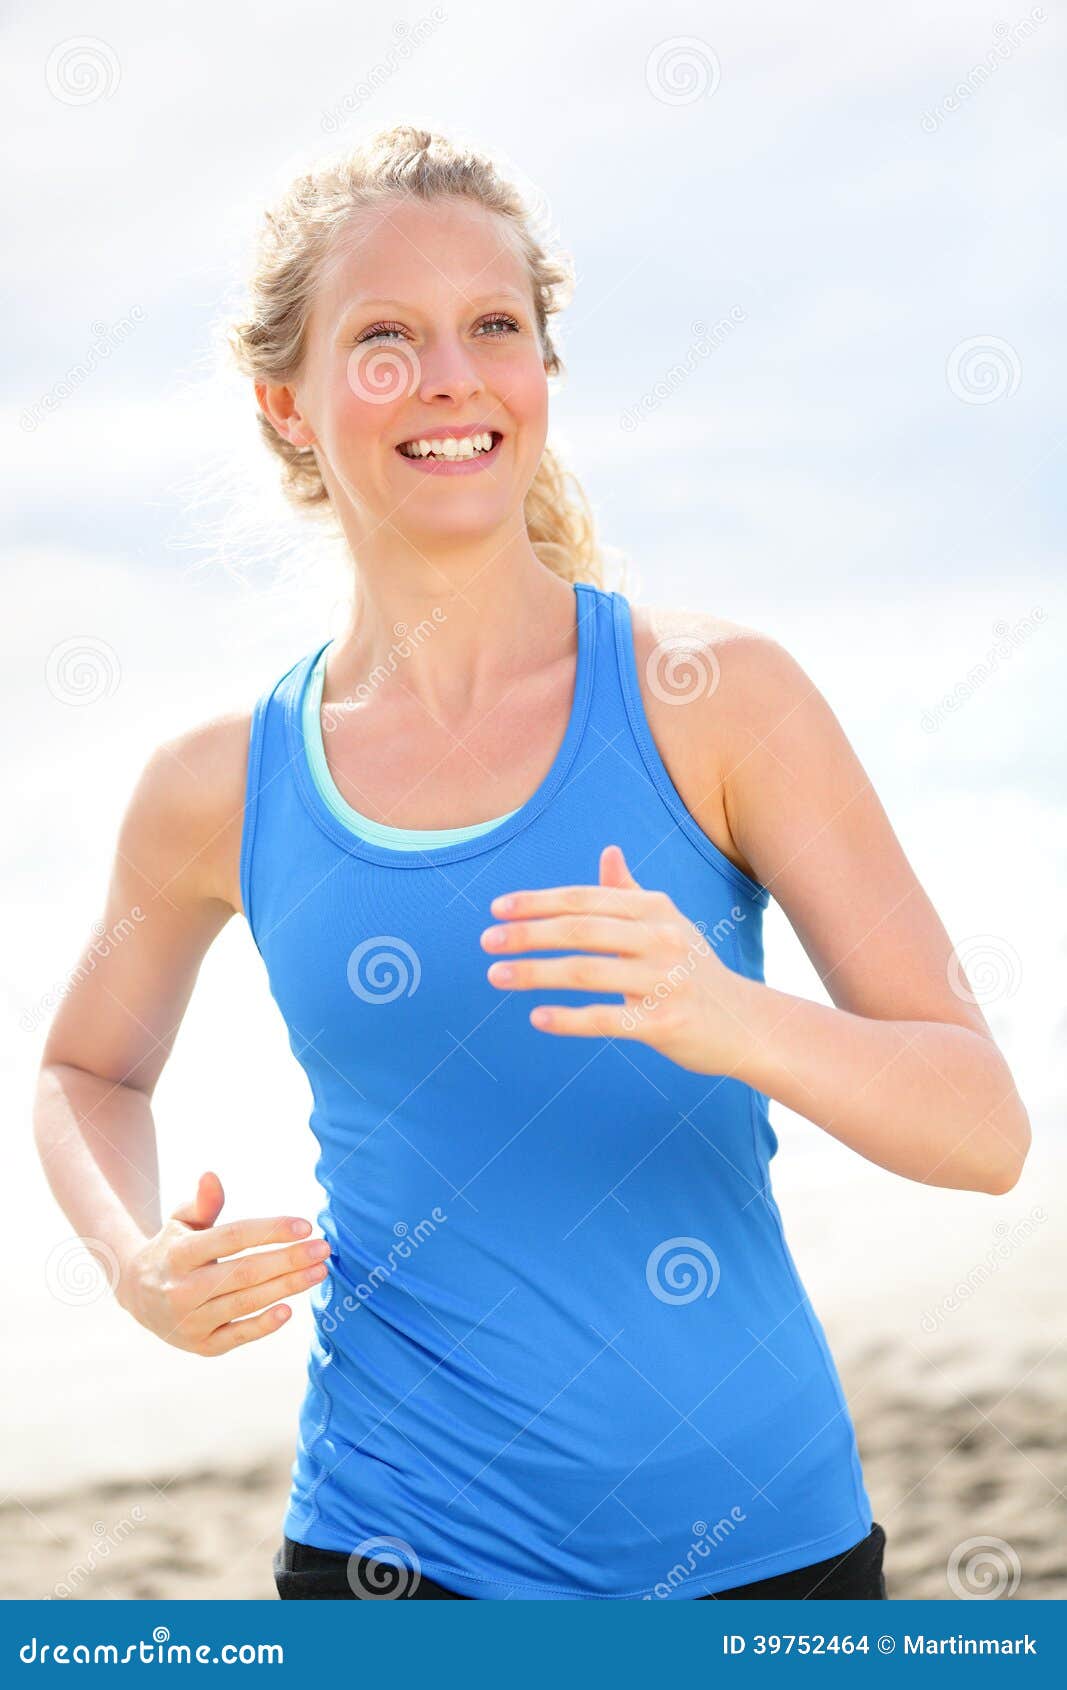 ... jogging happy on beach. Female runner athlete living healthy lifestyle